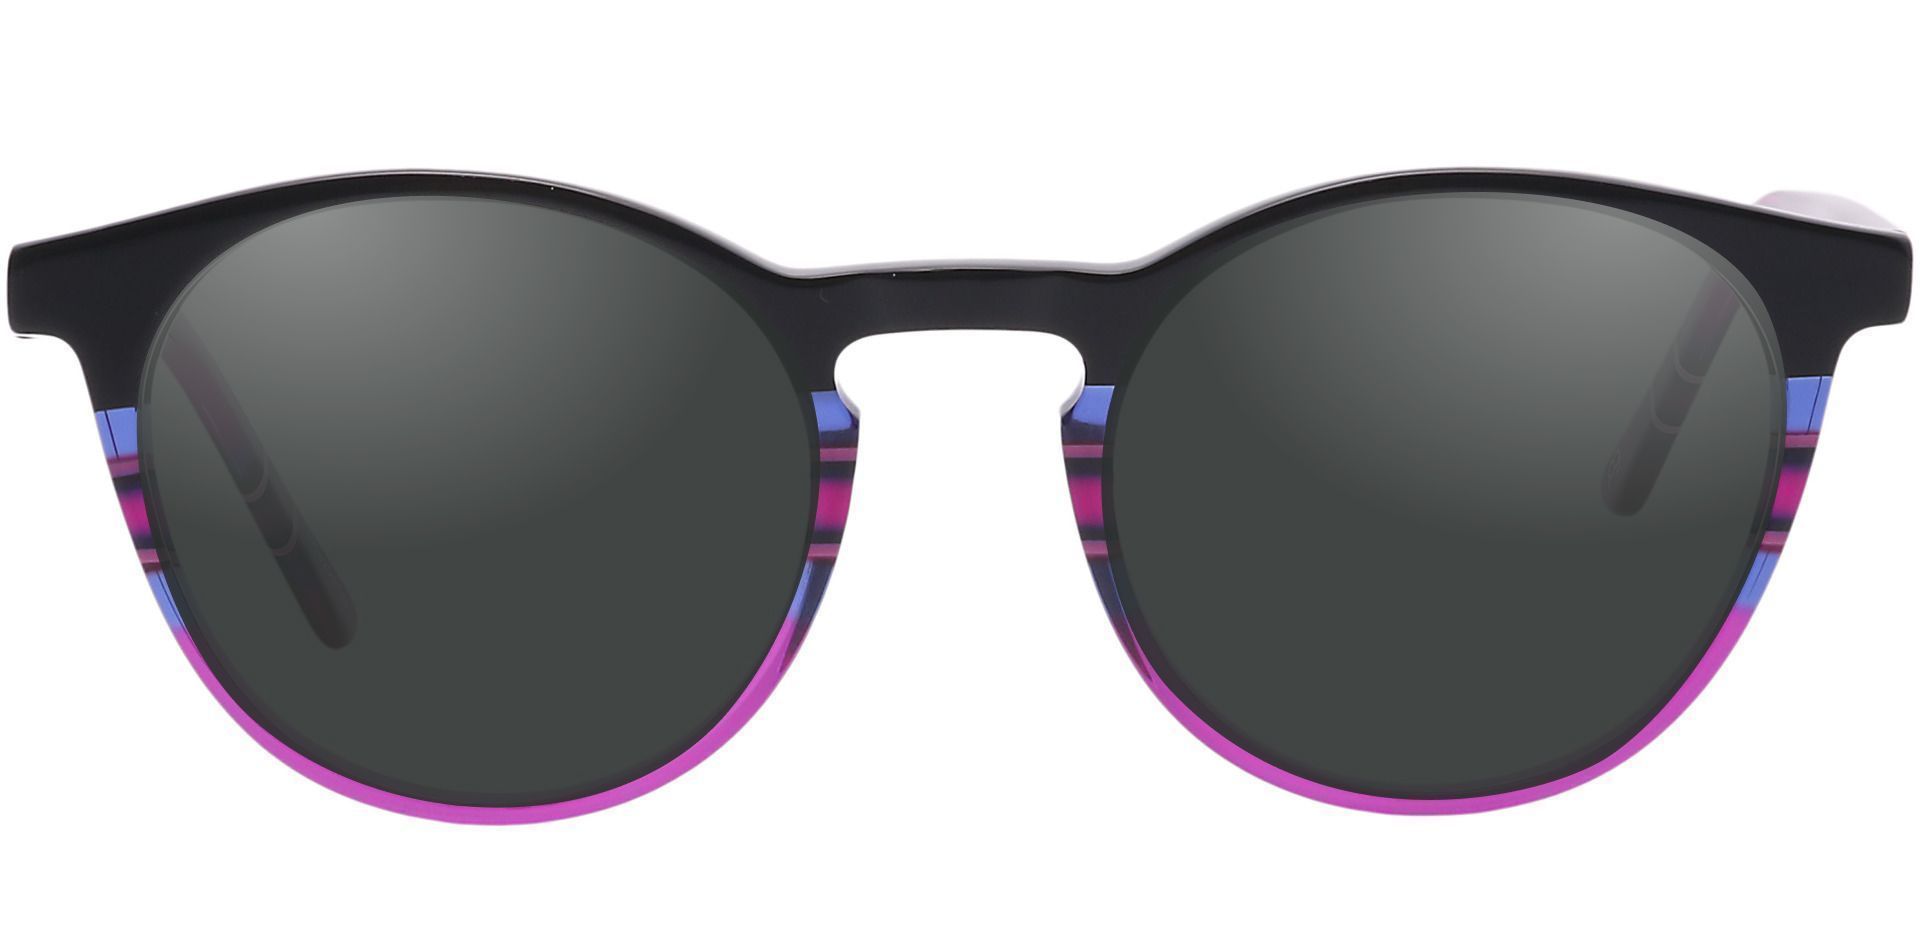 Jellie Round Reading Sunglasses - Purple Frame With Gray Lenses